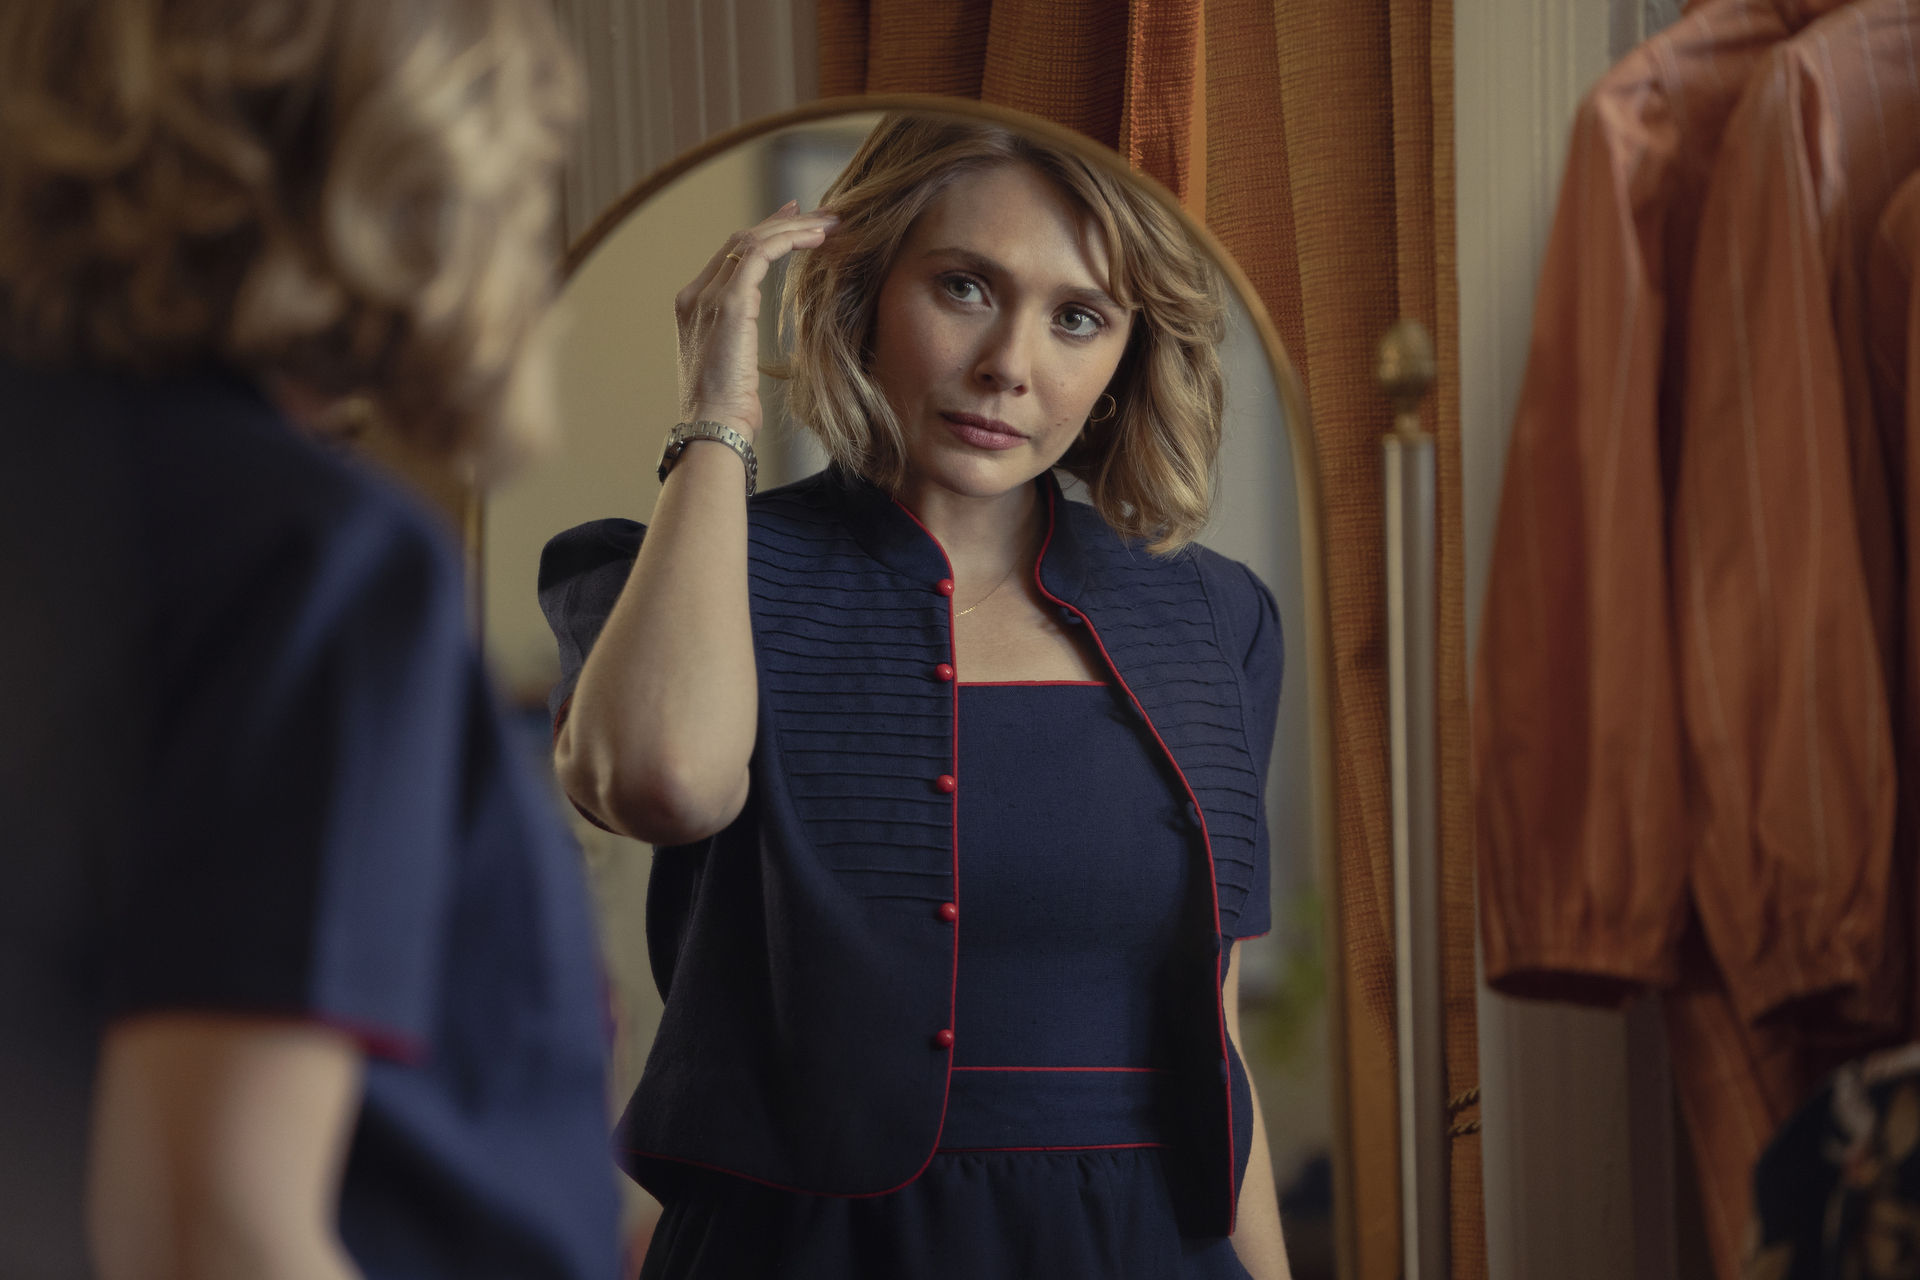 A woman with short, wavy blond hair wearing a navy blue dress and cover gazes at her reflection in the mirror; still of Elizabeth Olsen from "Love & Death"